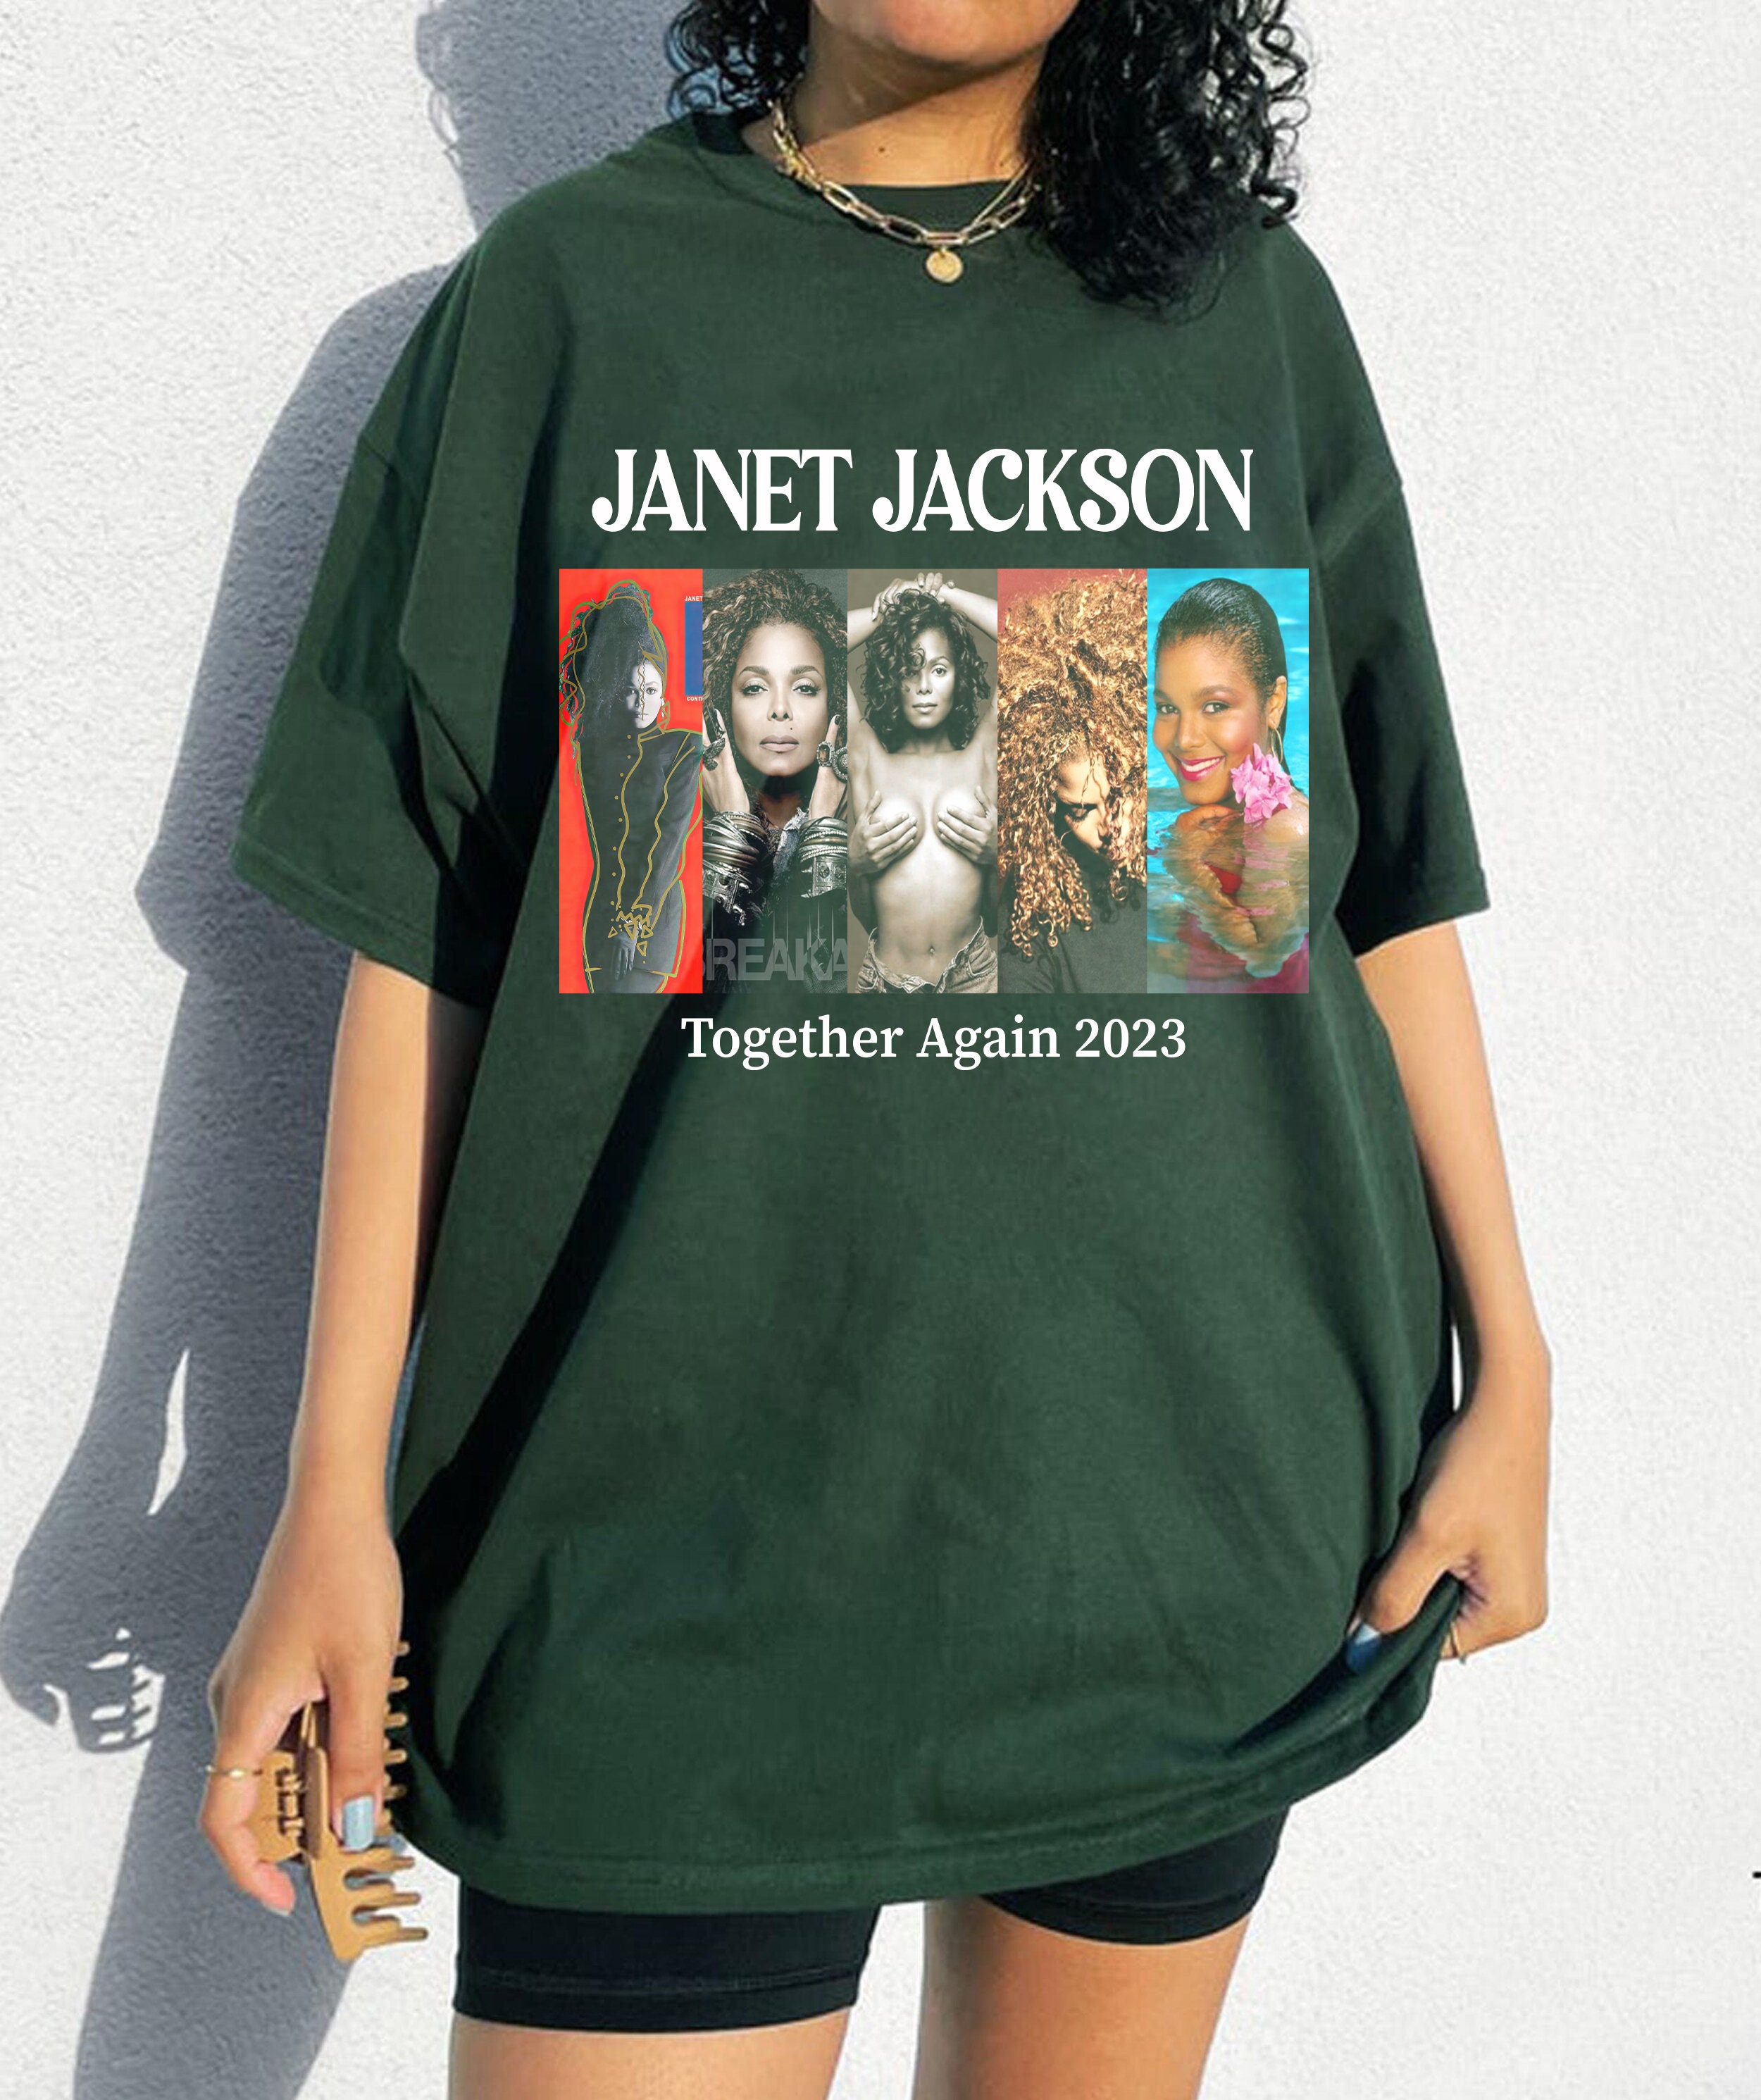 Discover Camiseta Janet Jackson Together Again Tour 2023 The Queen Of Pop para Hombre Mujer